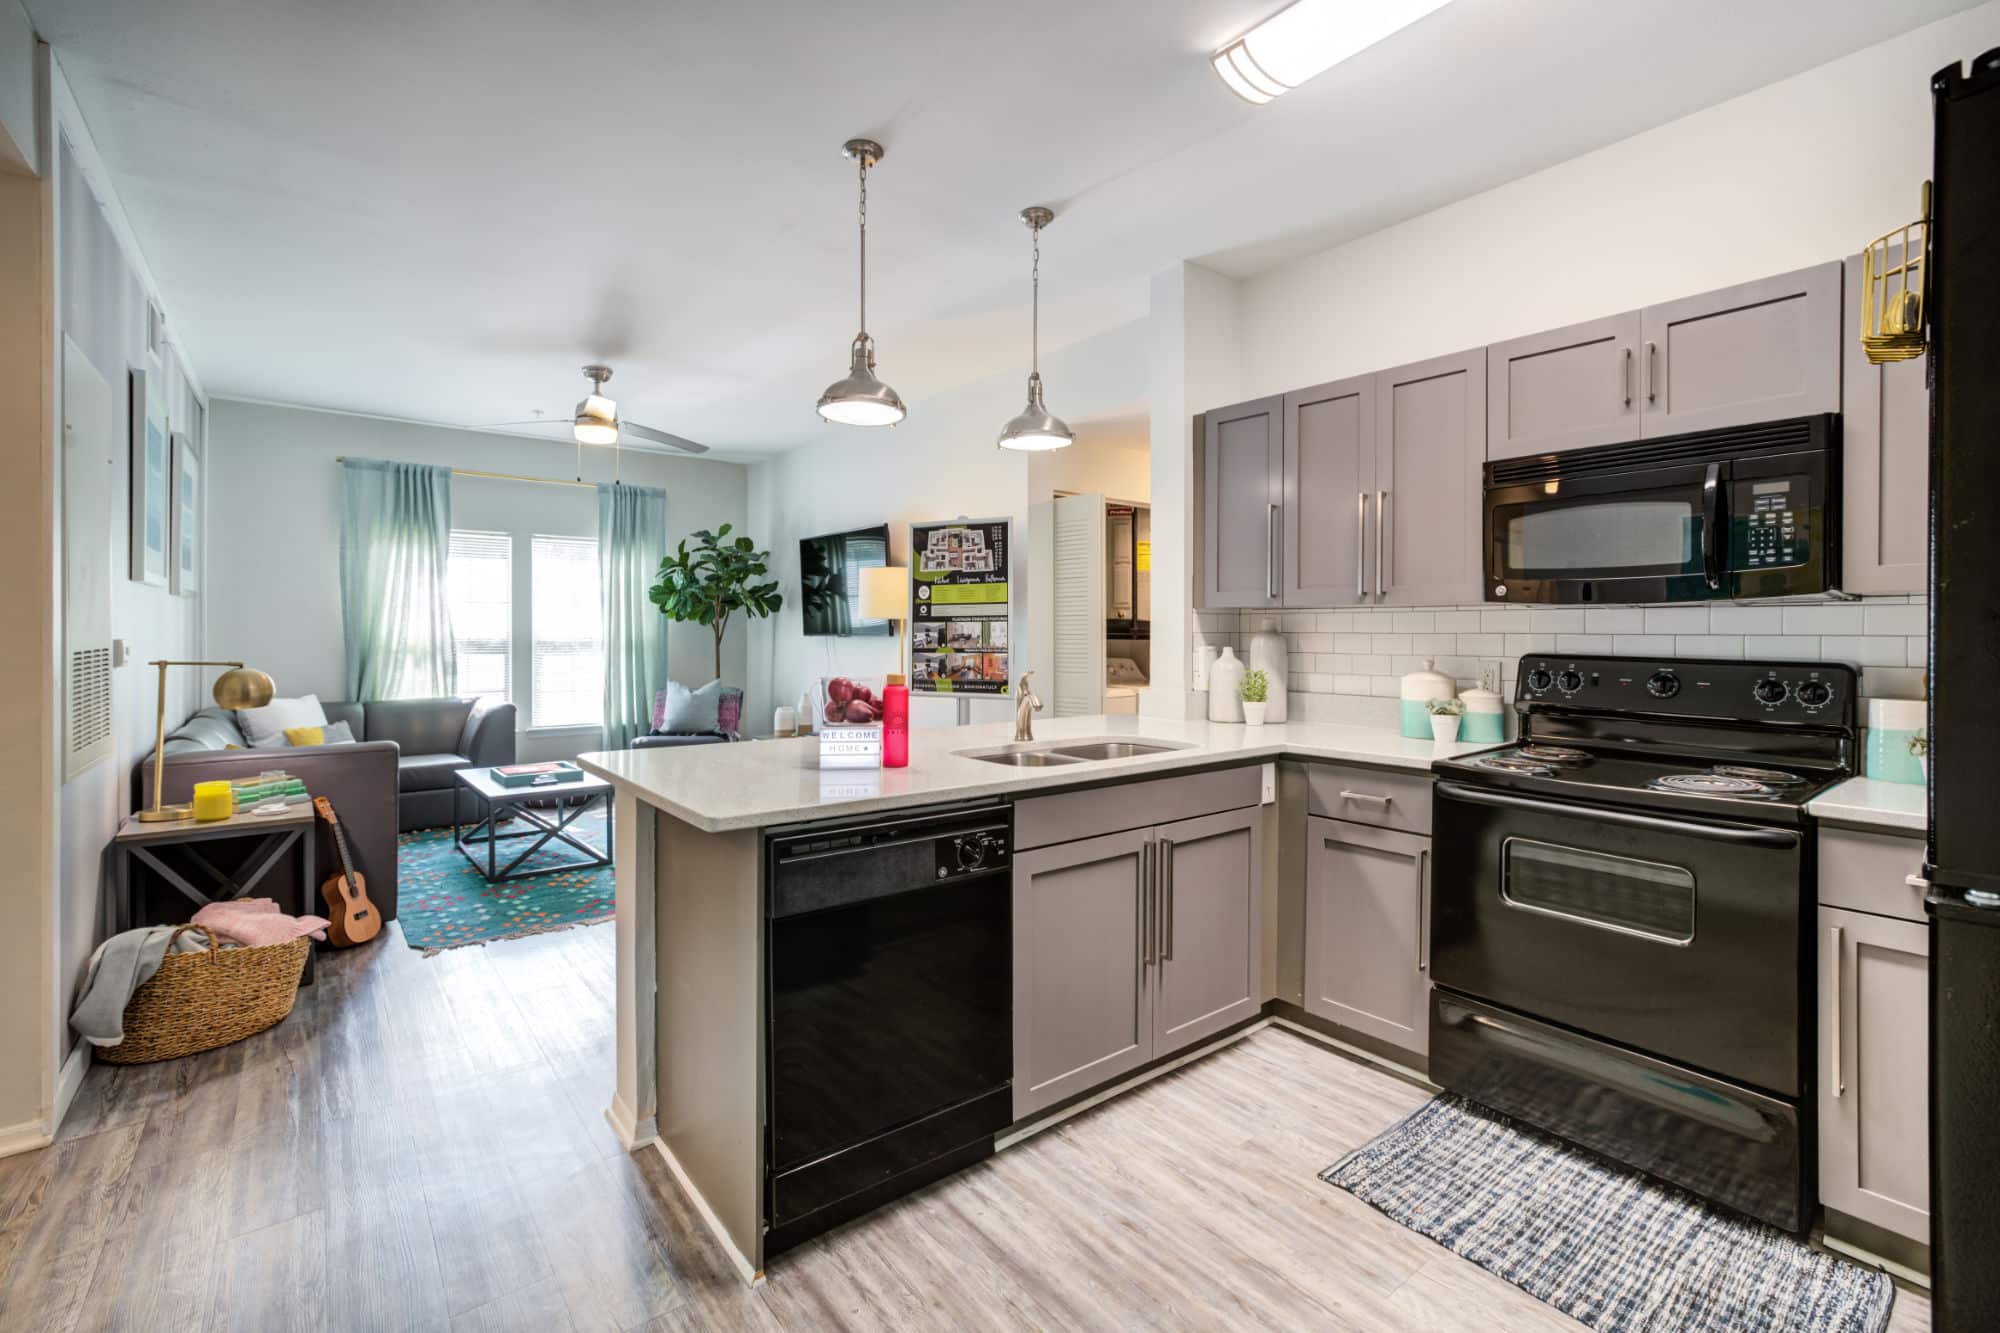 orion on orpington off campus apartments near ucf orlando fully furnished upgraded units available open floor plan kitchen to living room common areas